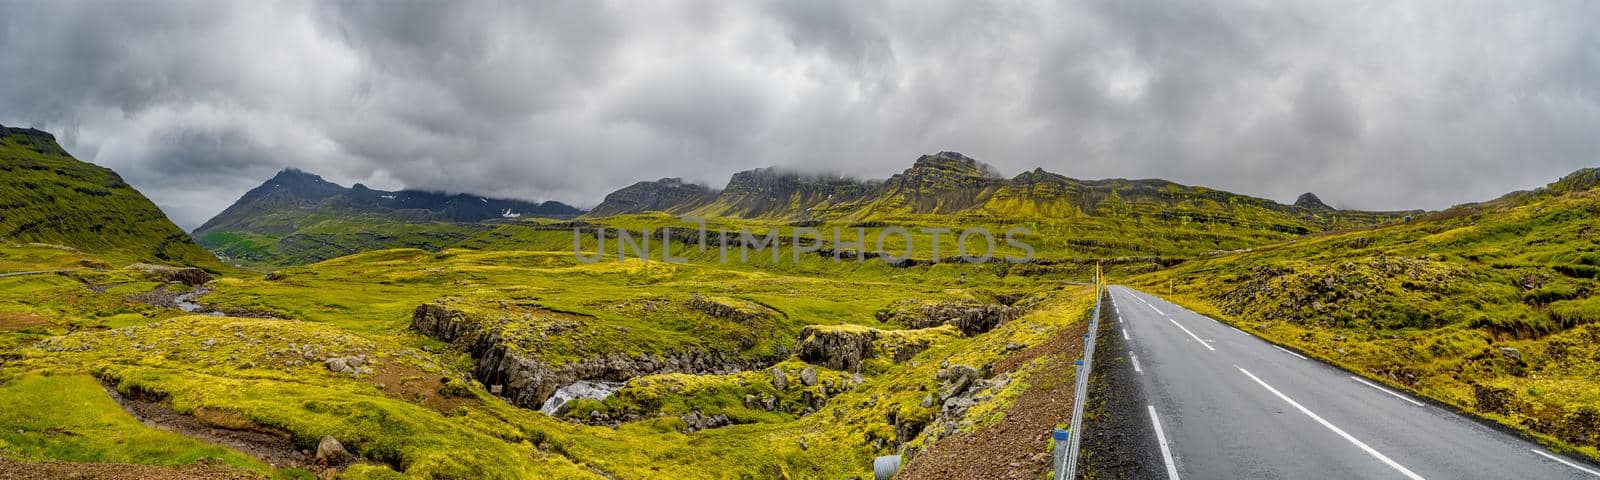 Panoramic view over lonely road through rough and greenish Icelandic landscape, Iceland, dramatic view of sky with clouds and rain